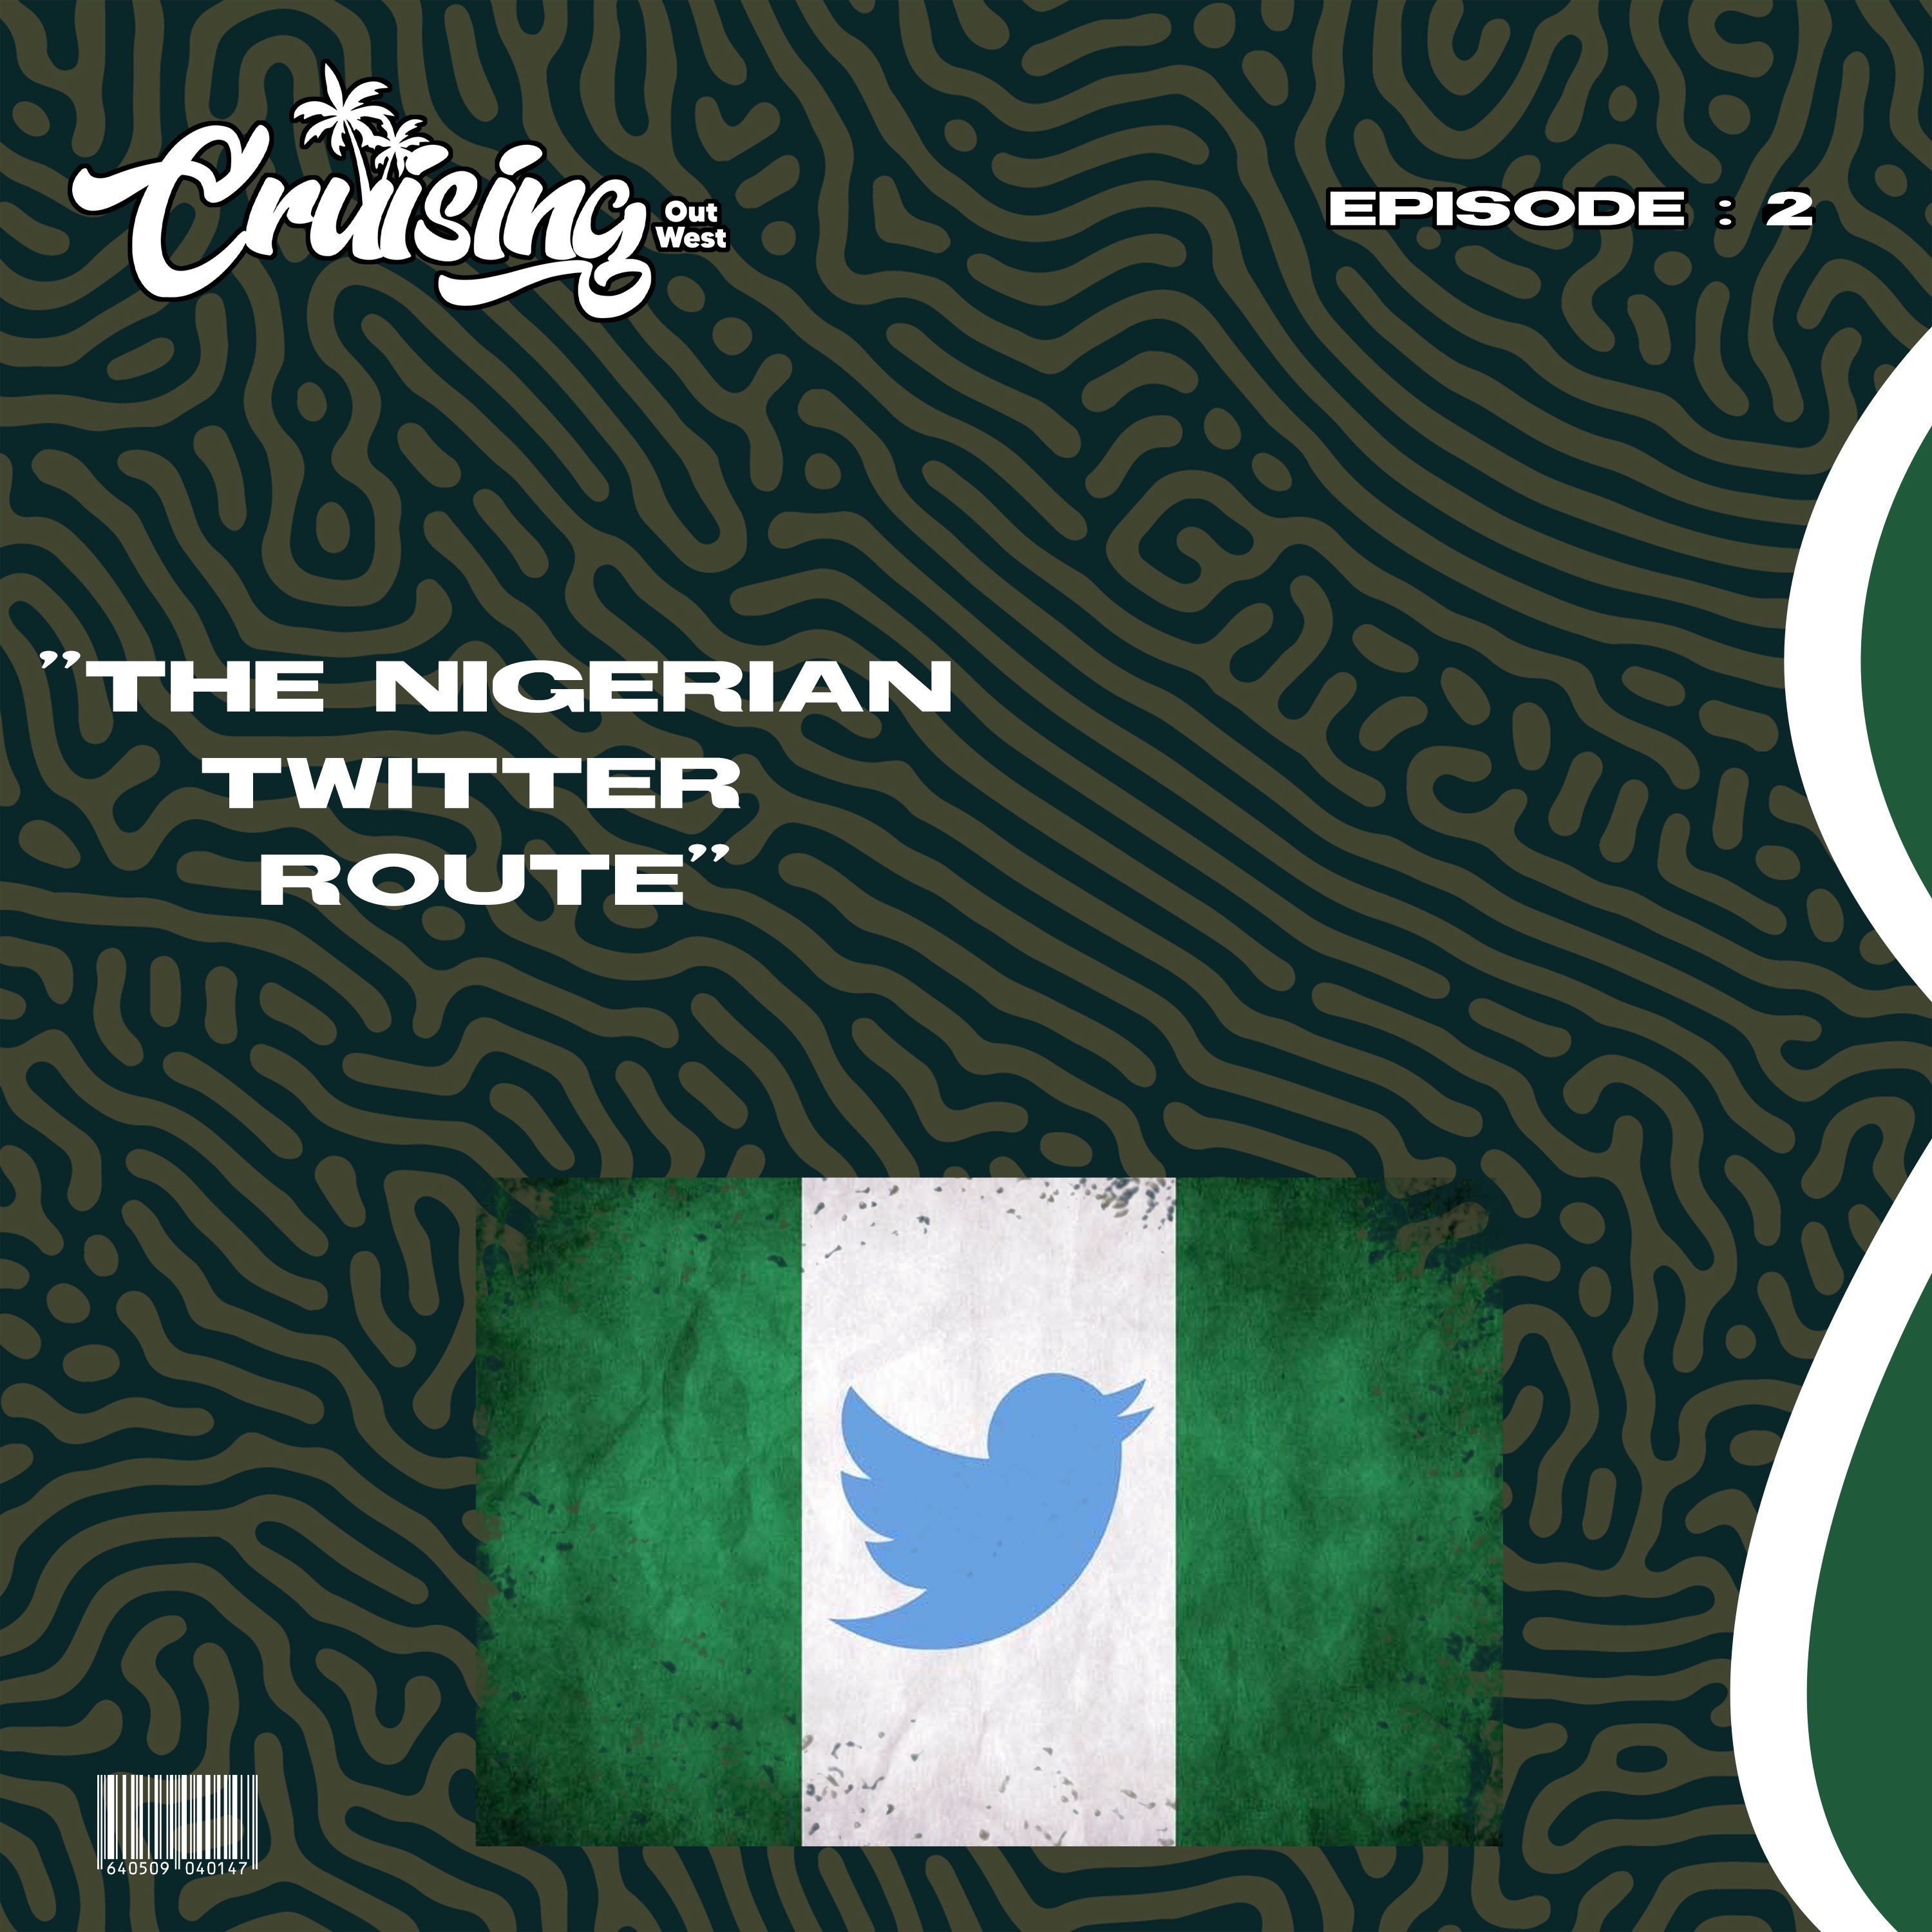 S1E2: The Second Sail: The Nigerian Twitter Route